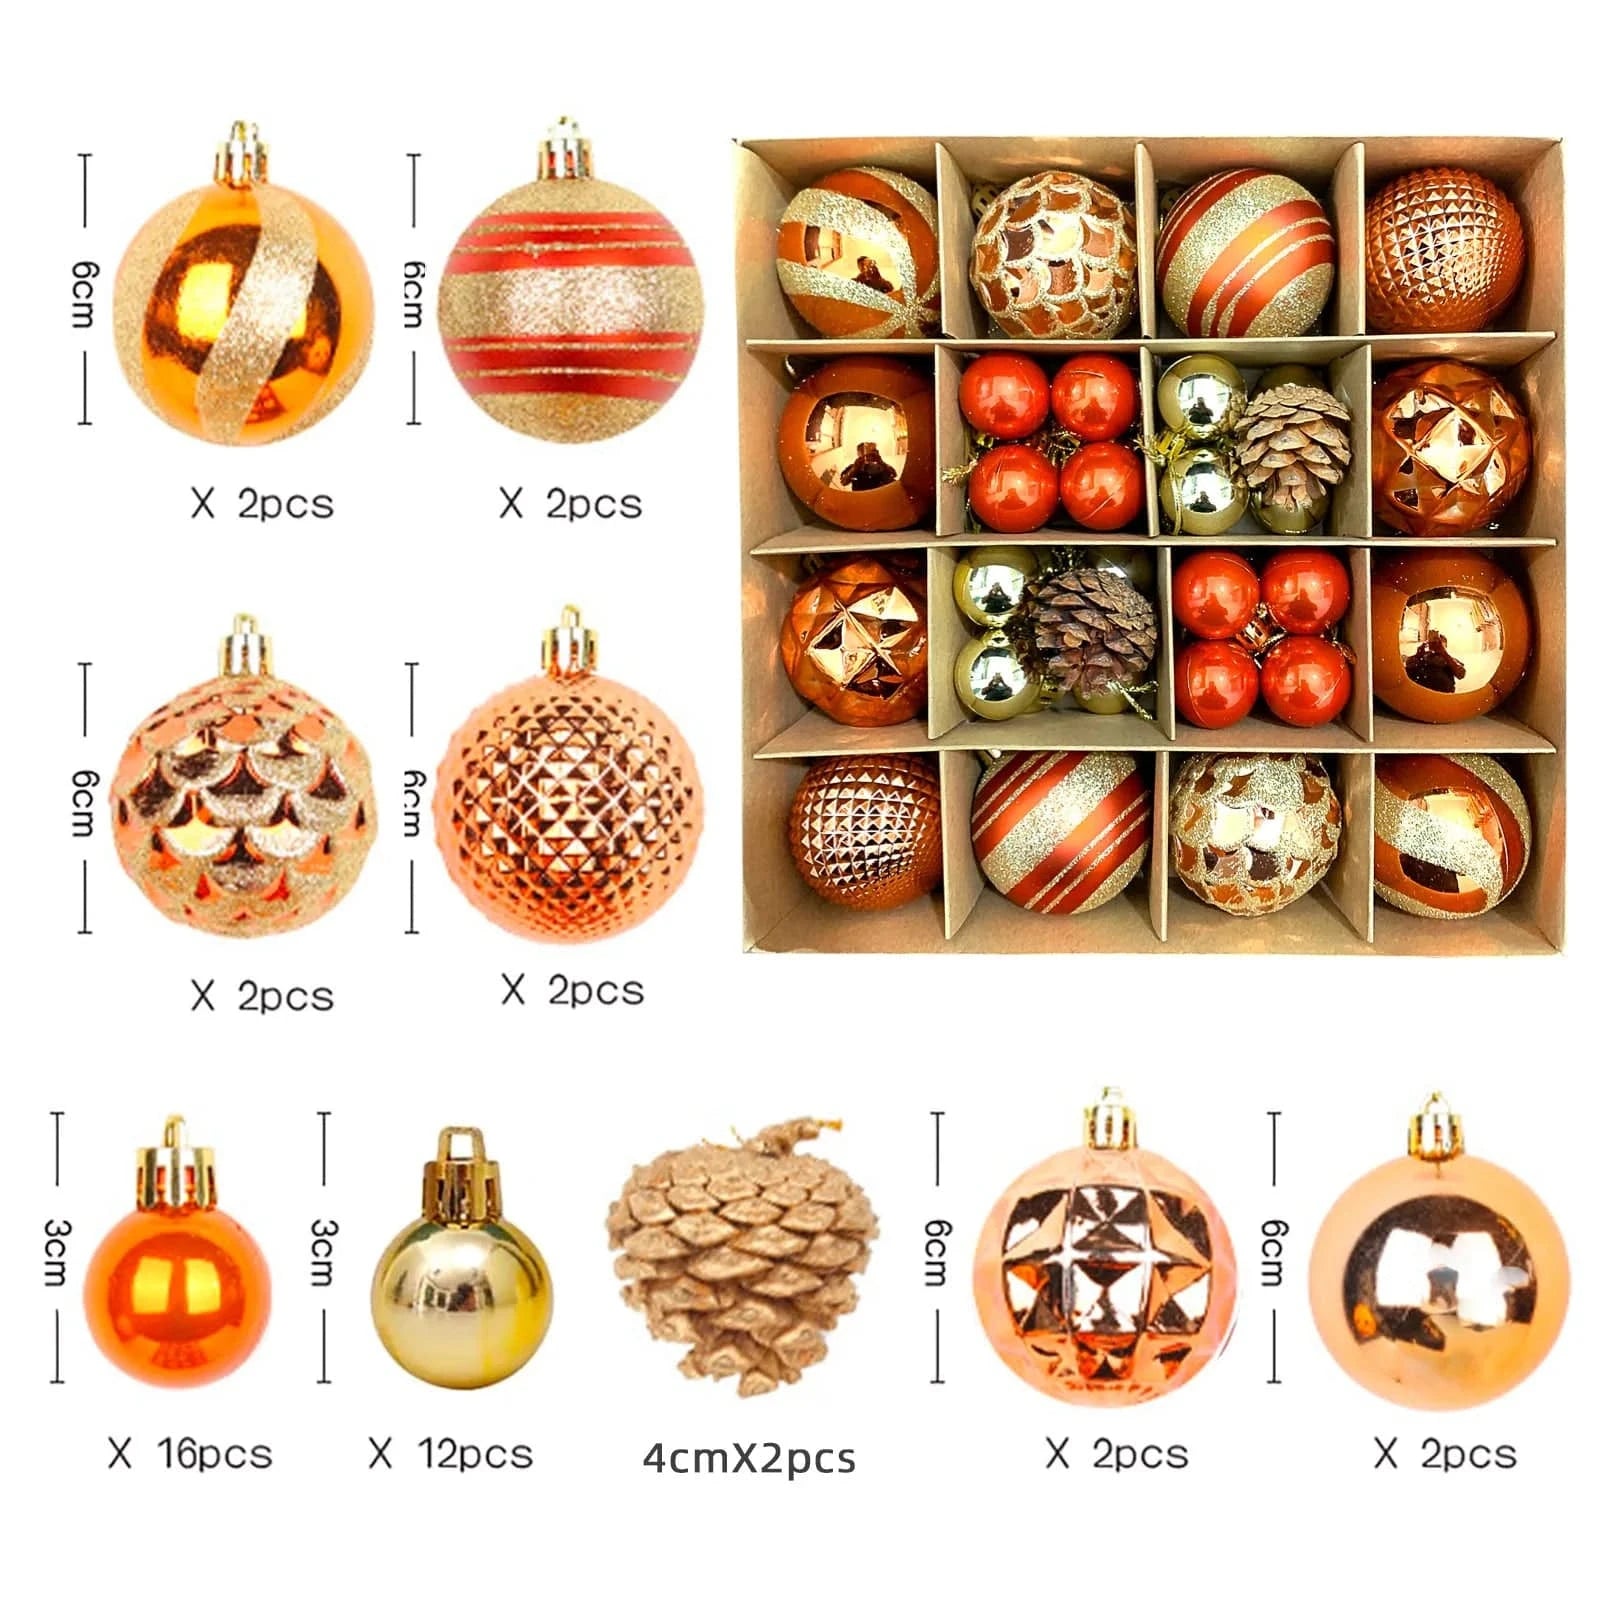 2023 Christmas Decoration 6cm Electroplated Plastic Balls Shaped Painted Christmas Balls Christmas Tree Hangings